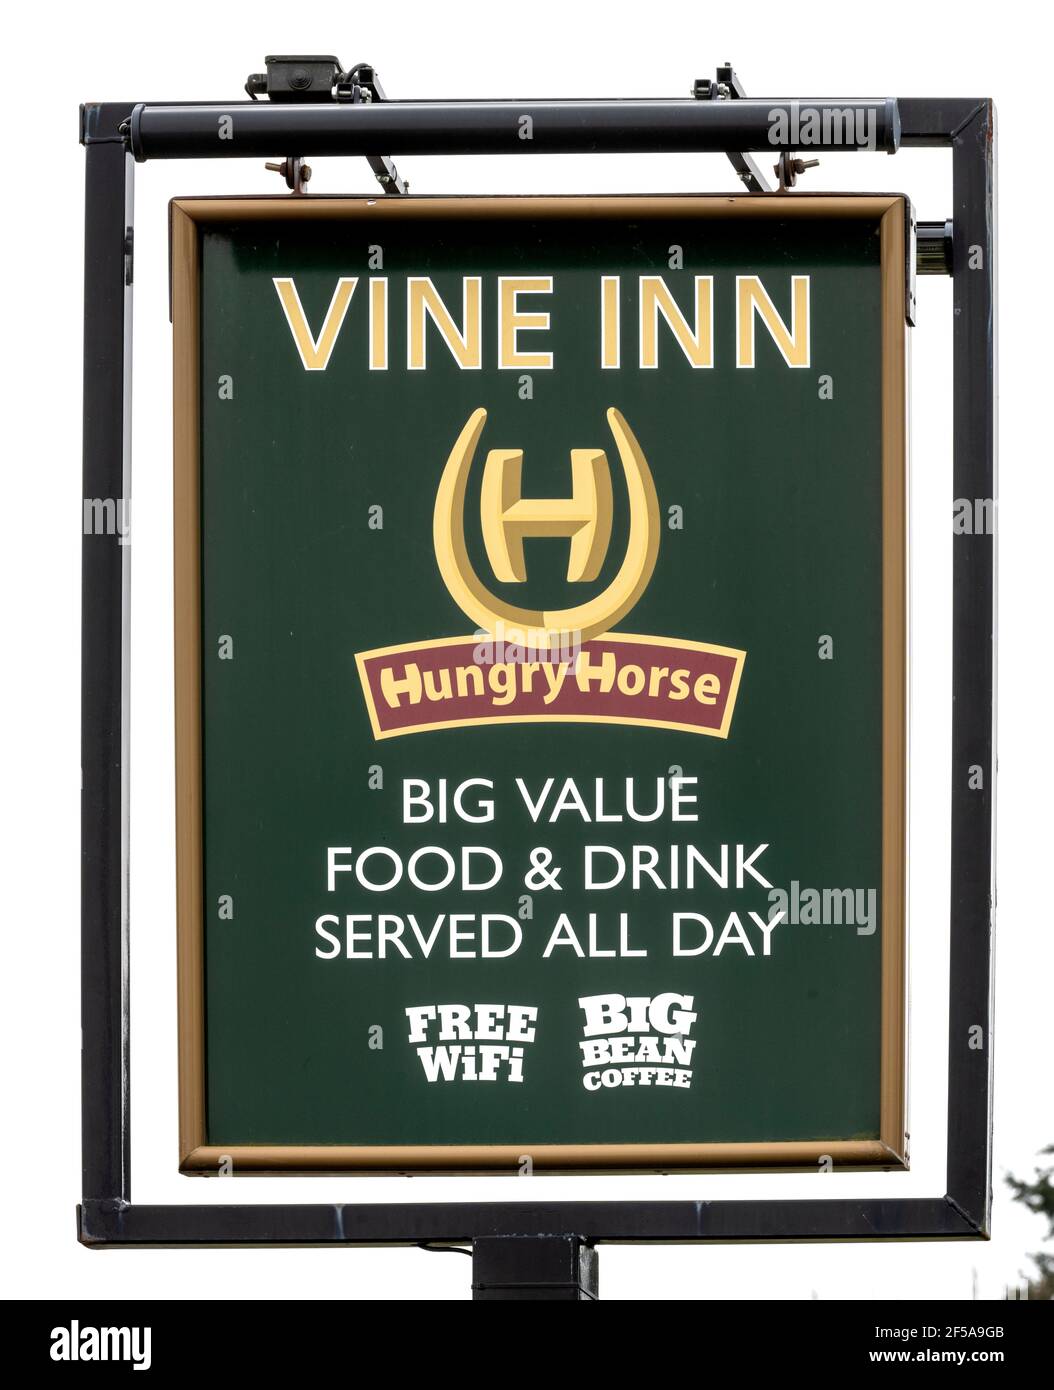 Traditional hanging pub sign at The Vine Inn - a Hungry Horse public house - Ower, Romsey, Hampshire, England, UK Stock Photo